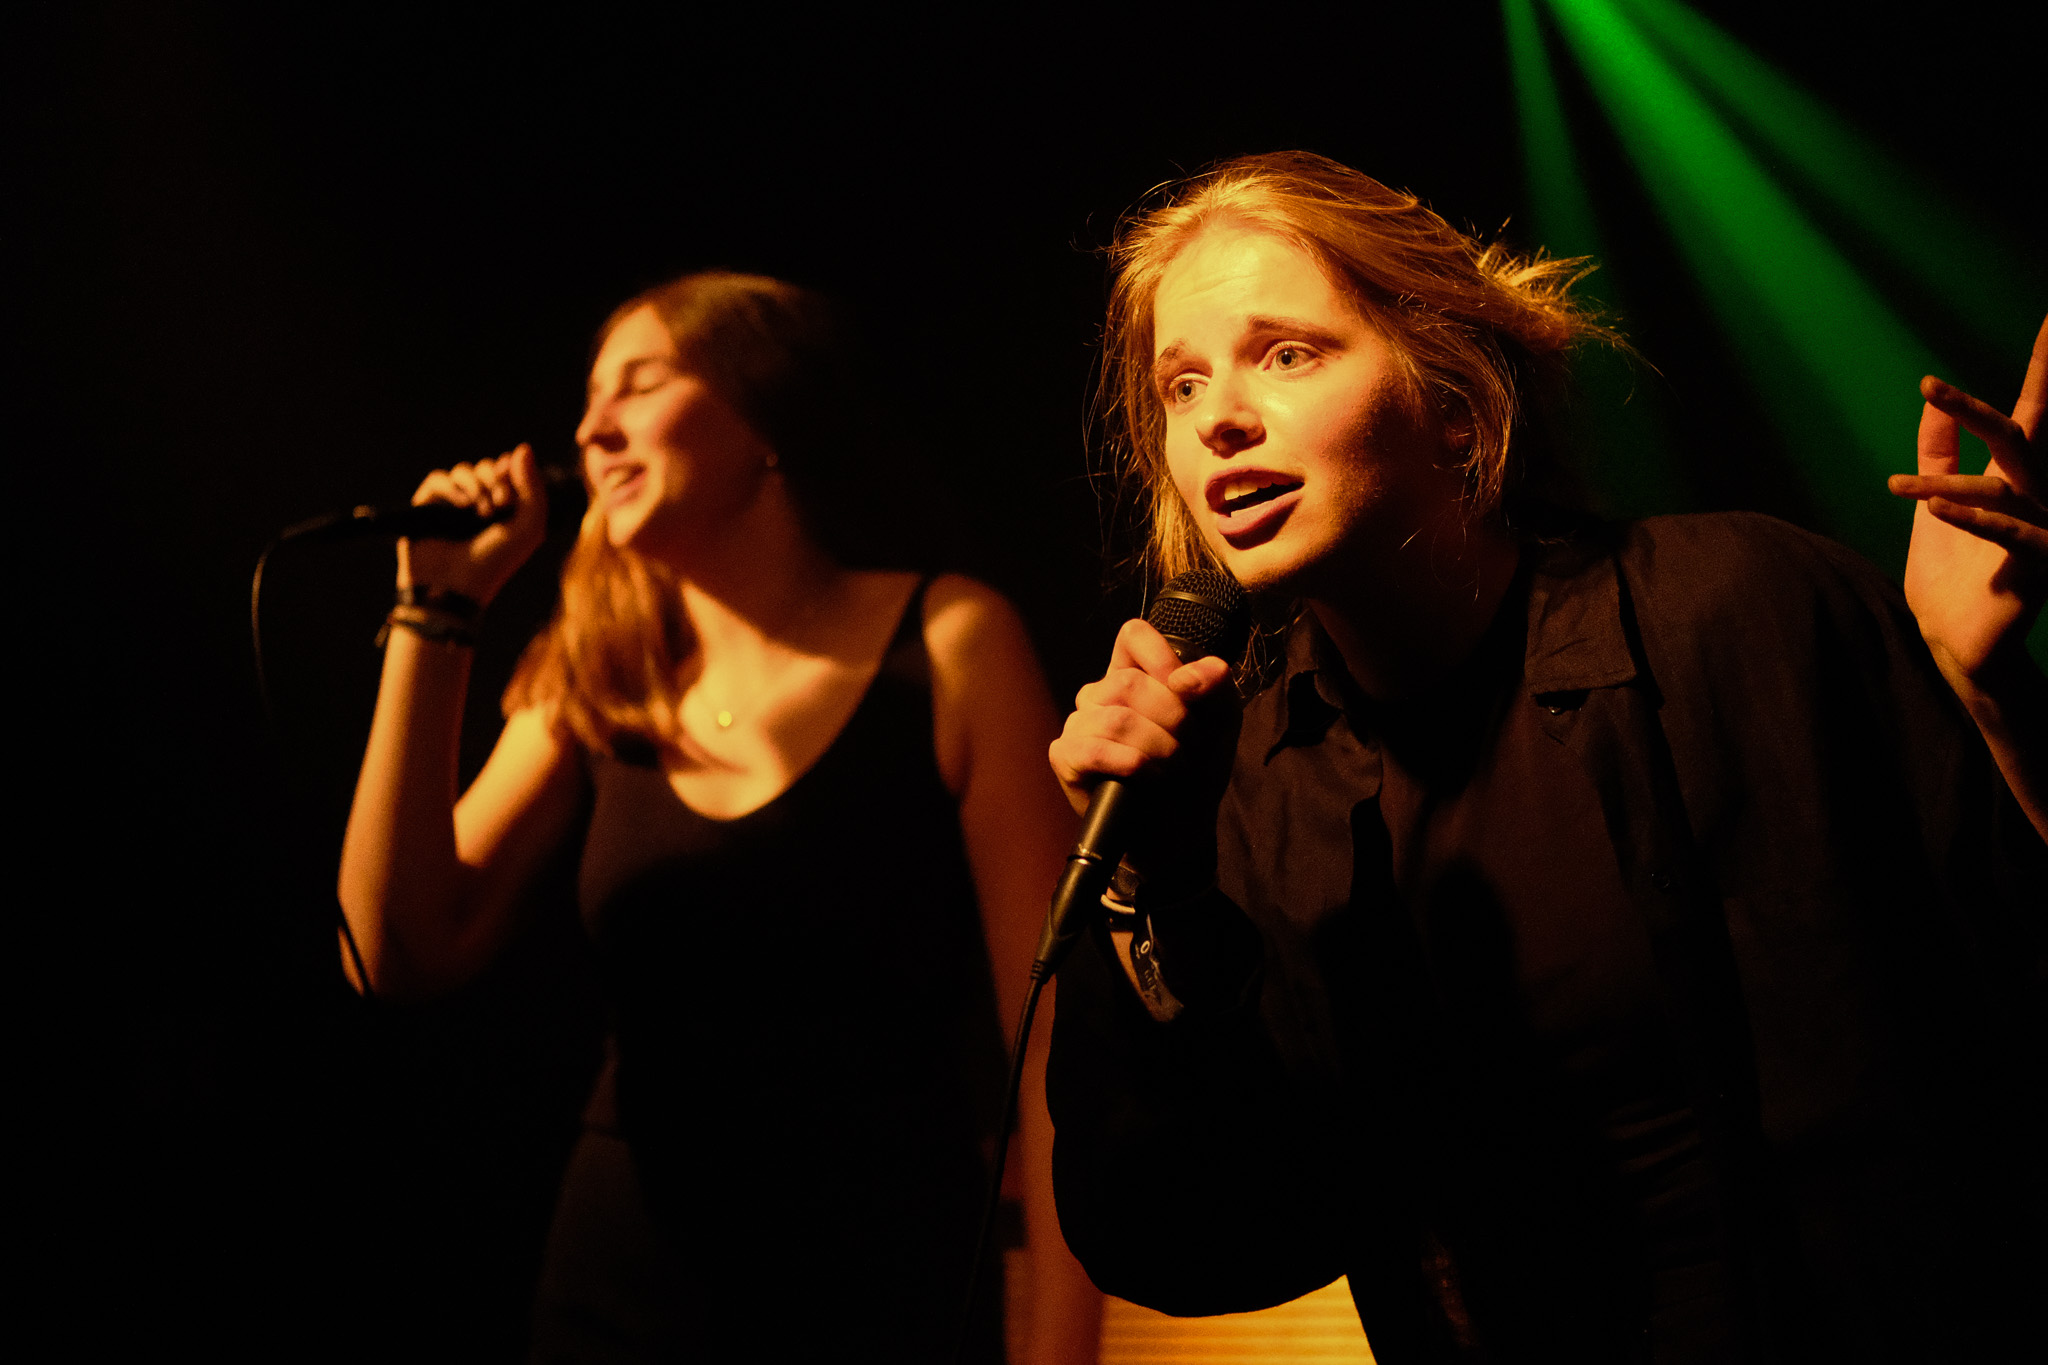 Madeline and Clarisse singing